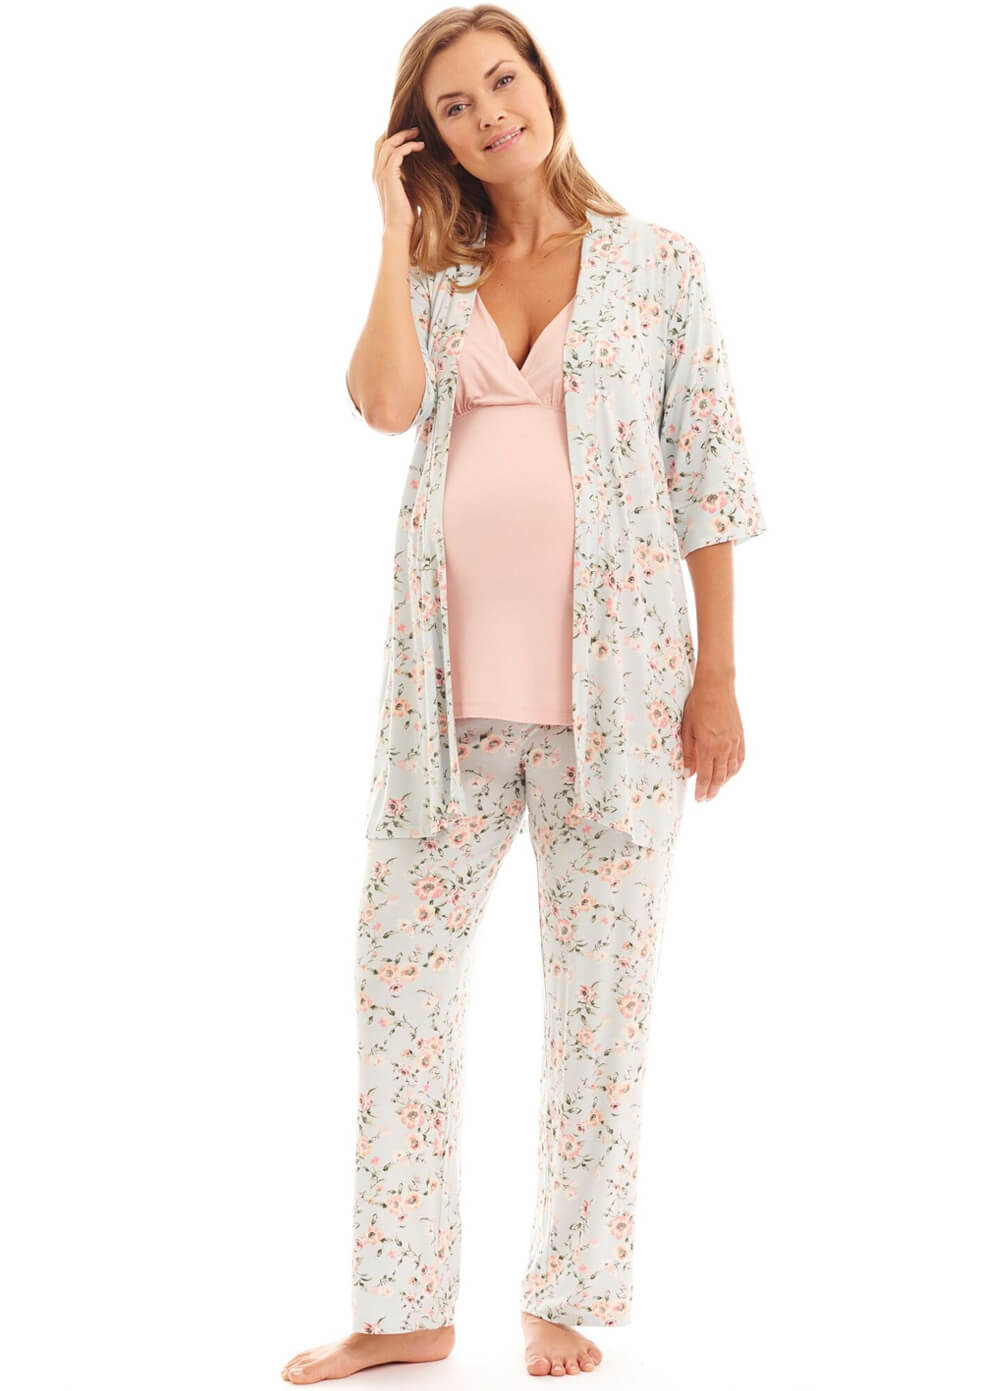 Analise Mommy & Me Maternity PJ Gift Set in Cloud Blue by Everly Grey 